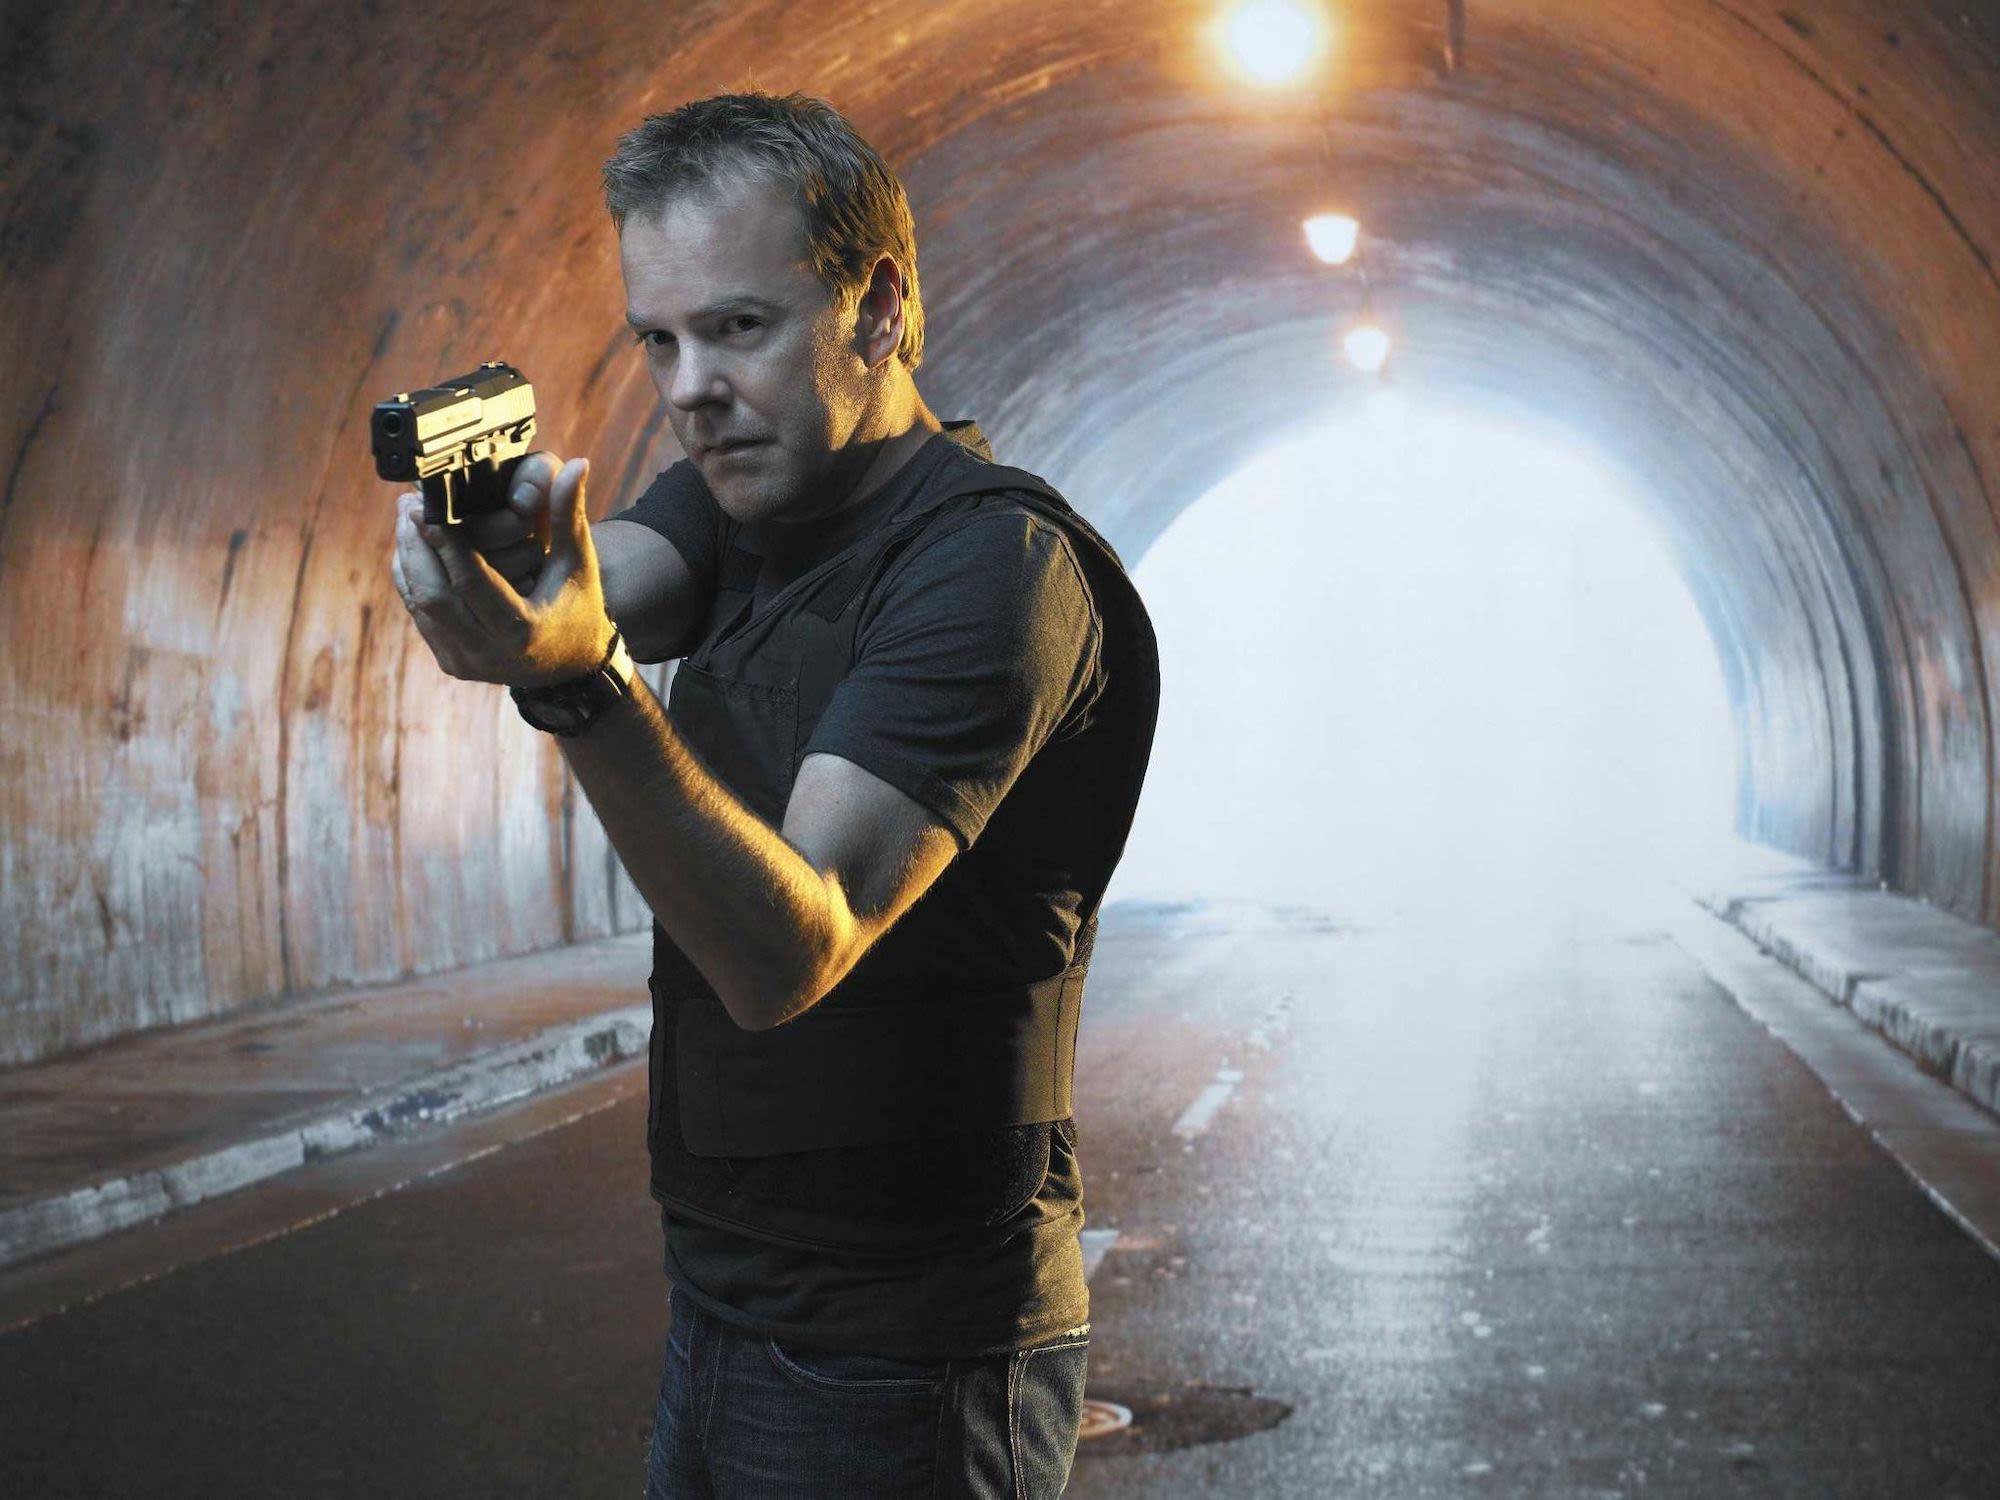 A ’24’ Movie Is in Early Development — But Will Kiefer Sutherland Return as Jack Bauer?